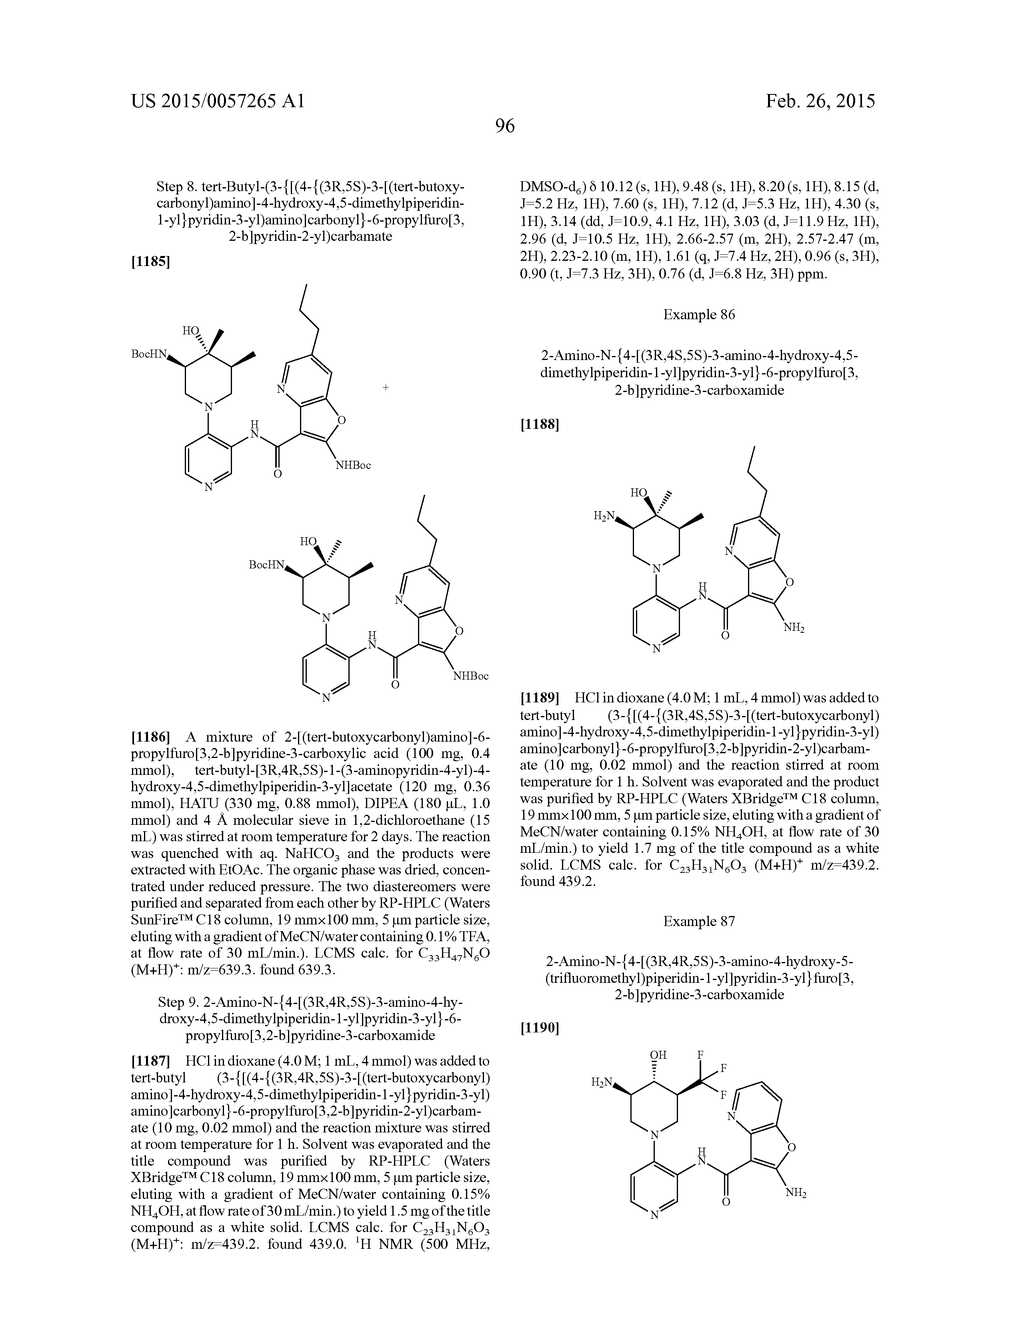 FURO- AND THIENO-PYRIDINE CARBOXAMIDE COMPOUNDS USEFUL AS PIM KINASE     INHIBITORS - diagram, schematic, and image 97